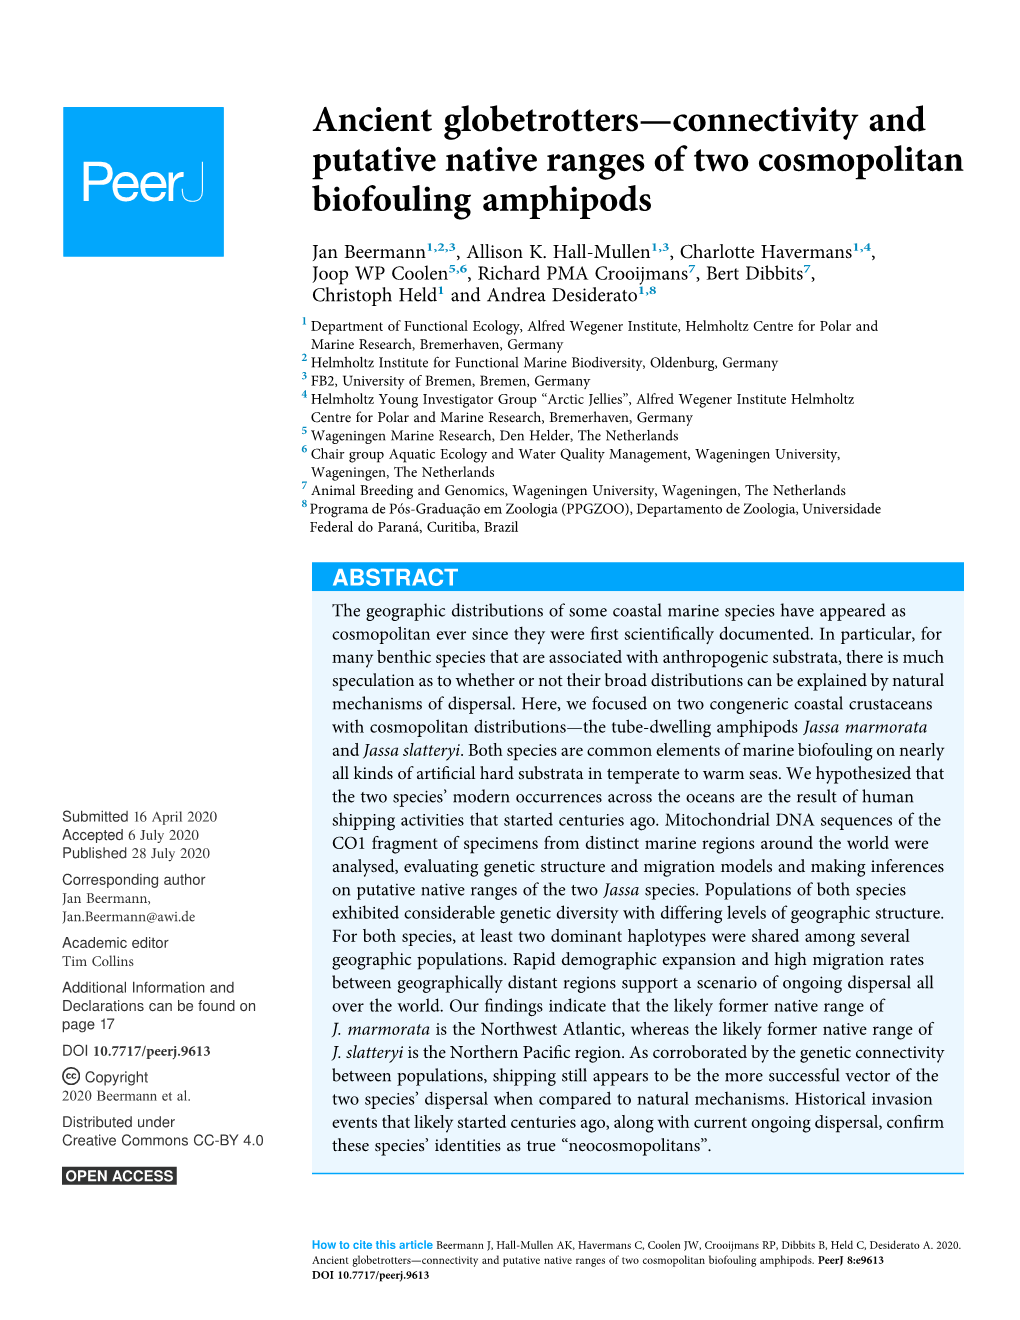 Ancient Globetrotters—Connectivity and Putative Native Ranges of Two Cosmopolitan Biofouling Amphipods